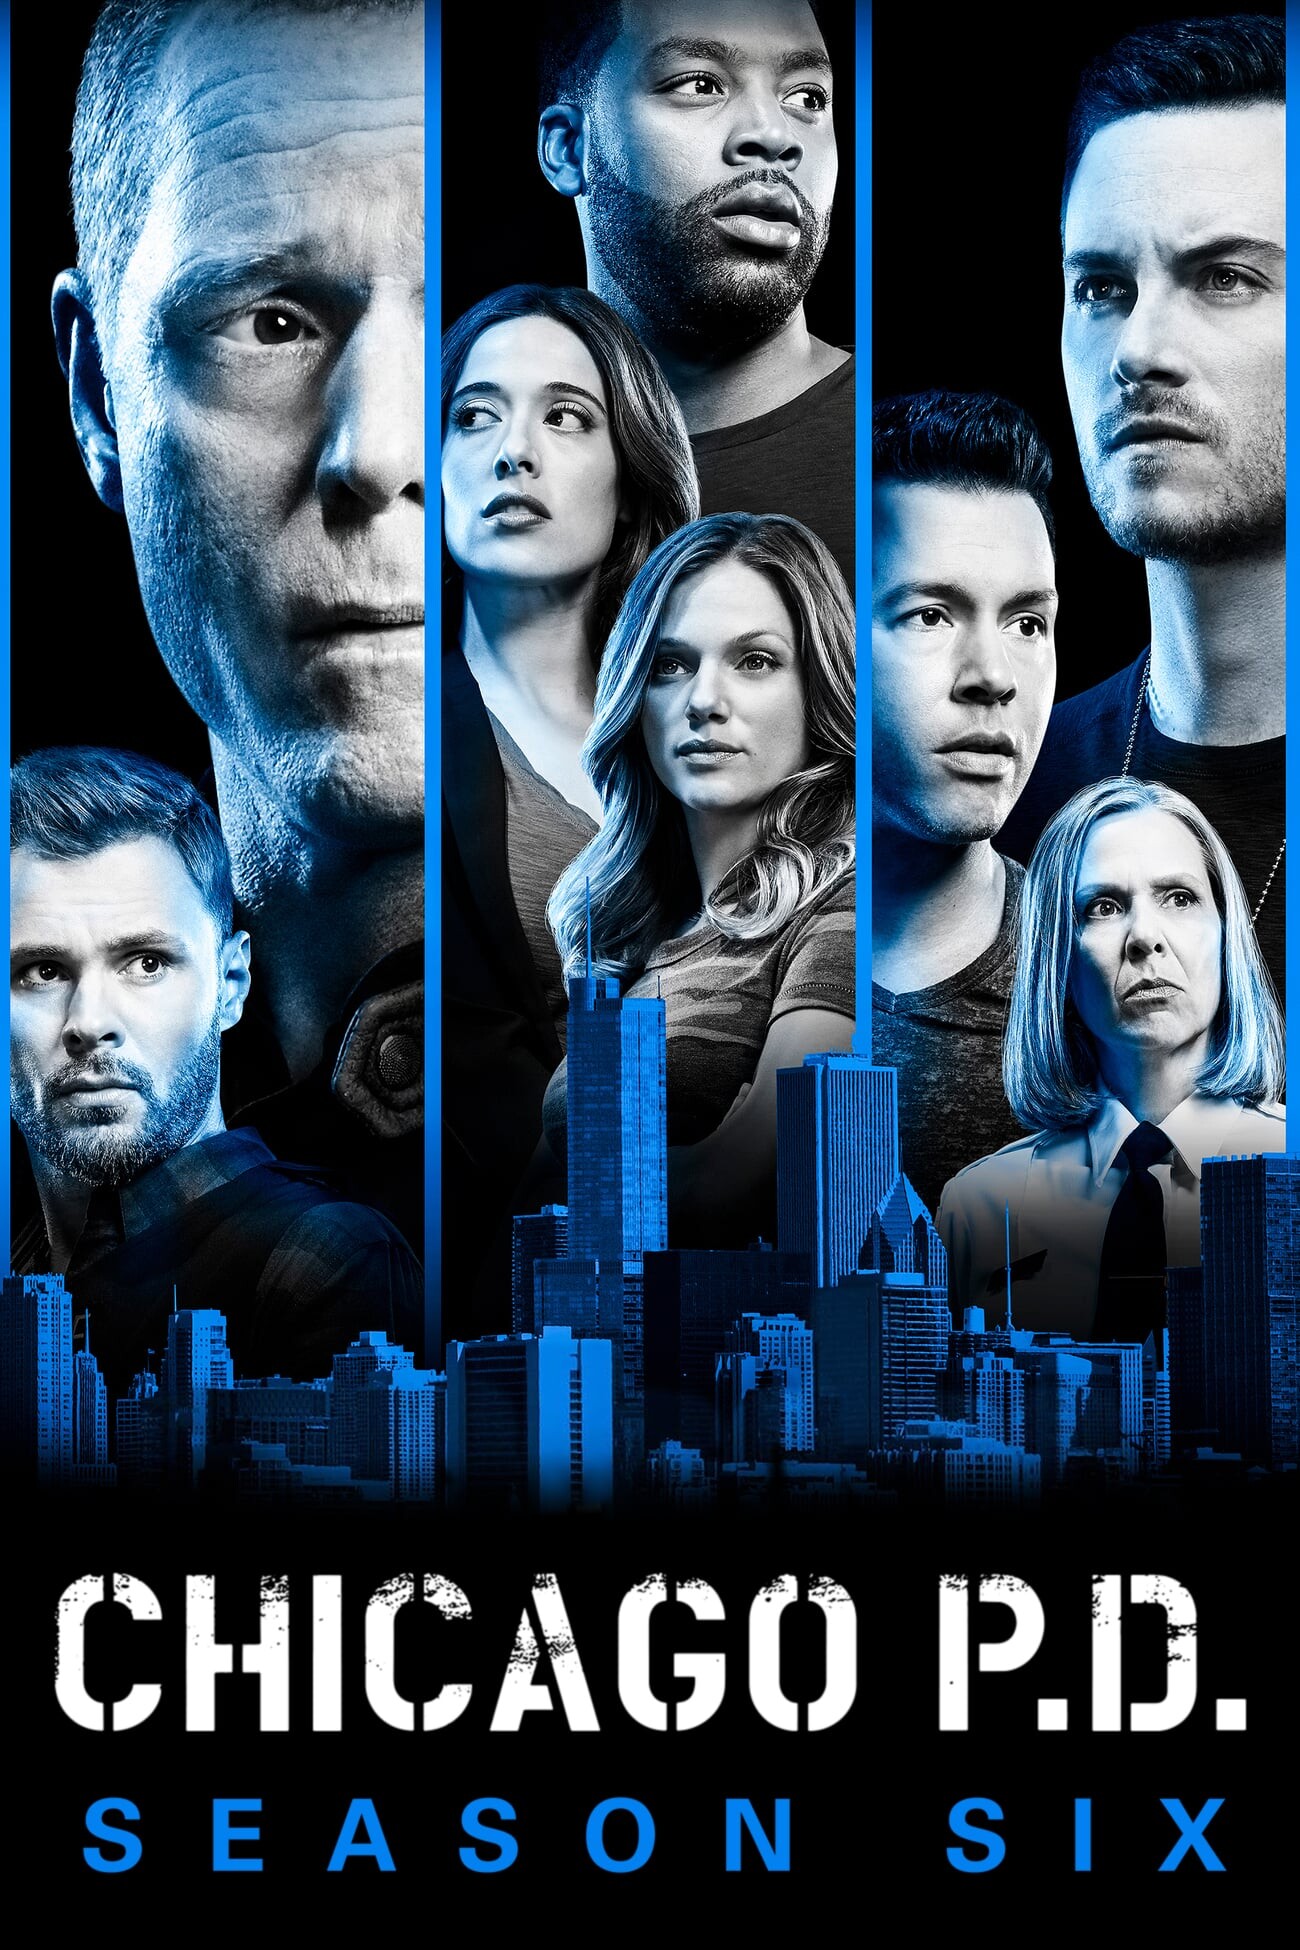 Chicago P.D. (TV Series): Release Poster Of Season 6, A Spin-Off Of Chicago Fire. 1300x1950 HD Wallpaper.